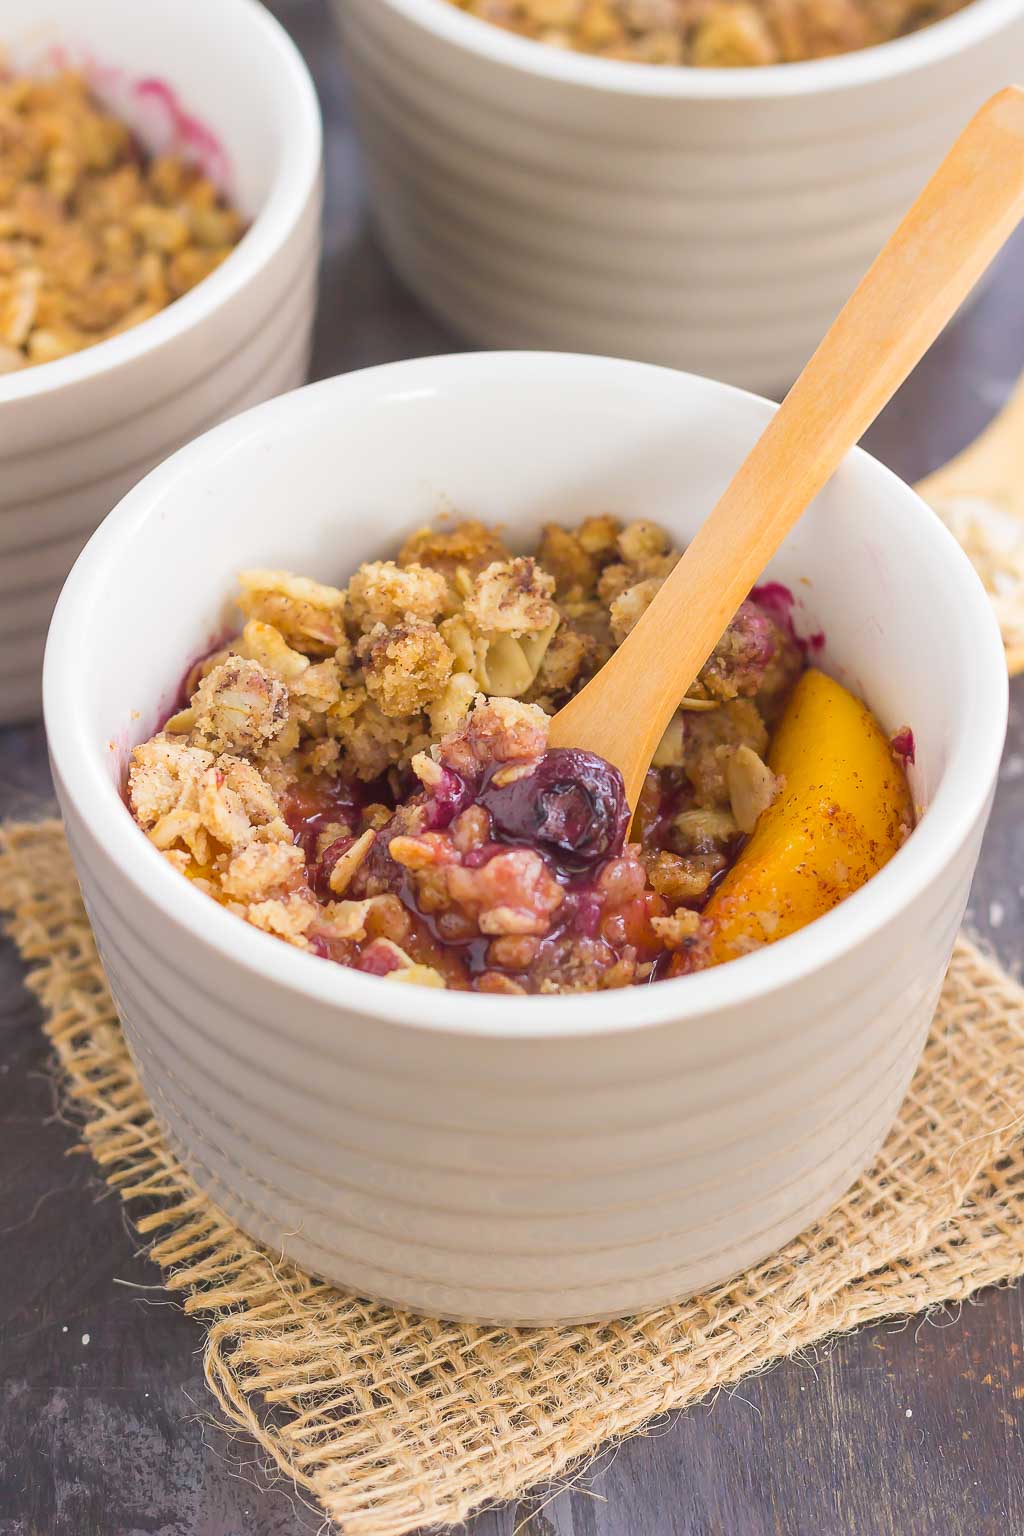 With fresh blueberries, juicy peaches, and a buttery crumble topping, this Peach Blueberry Crisp will quickly become your favorite dessert!